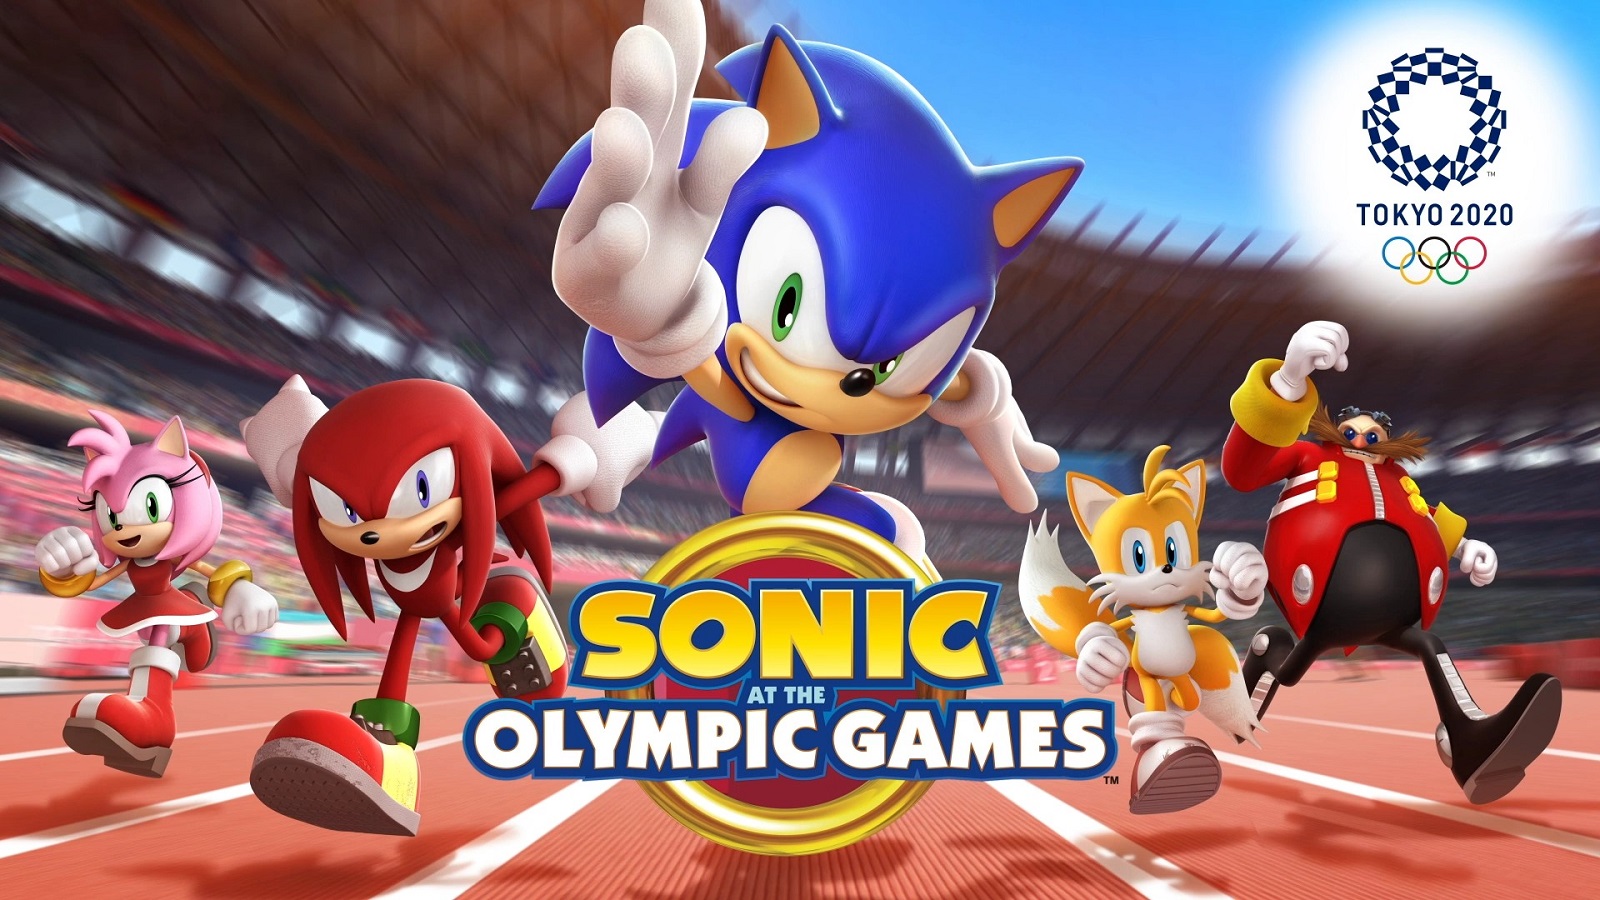 Trailer de Sonic at the Olympic Games 2020